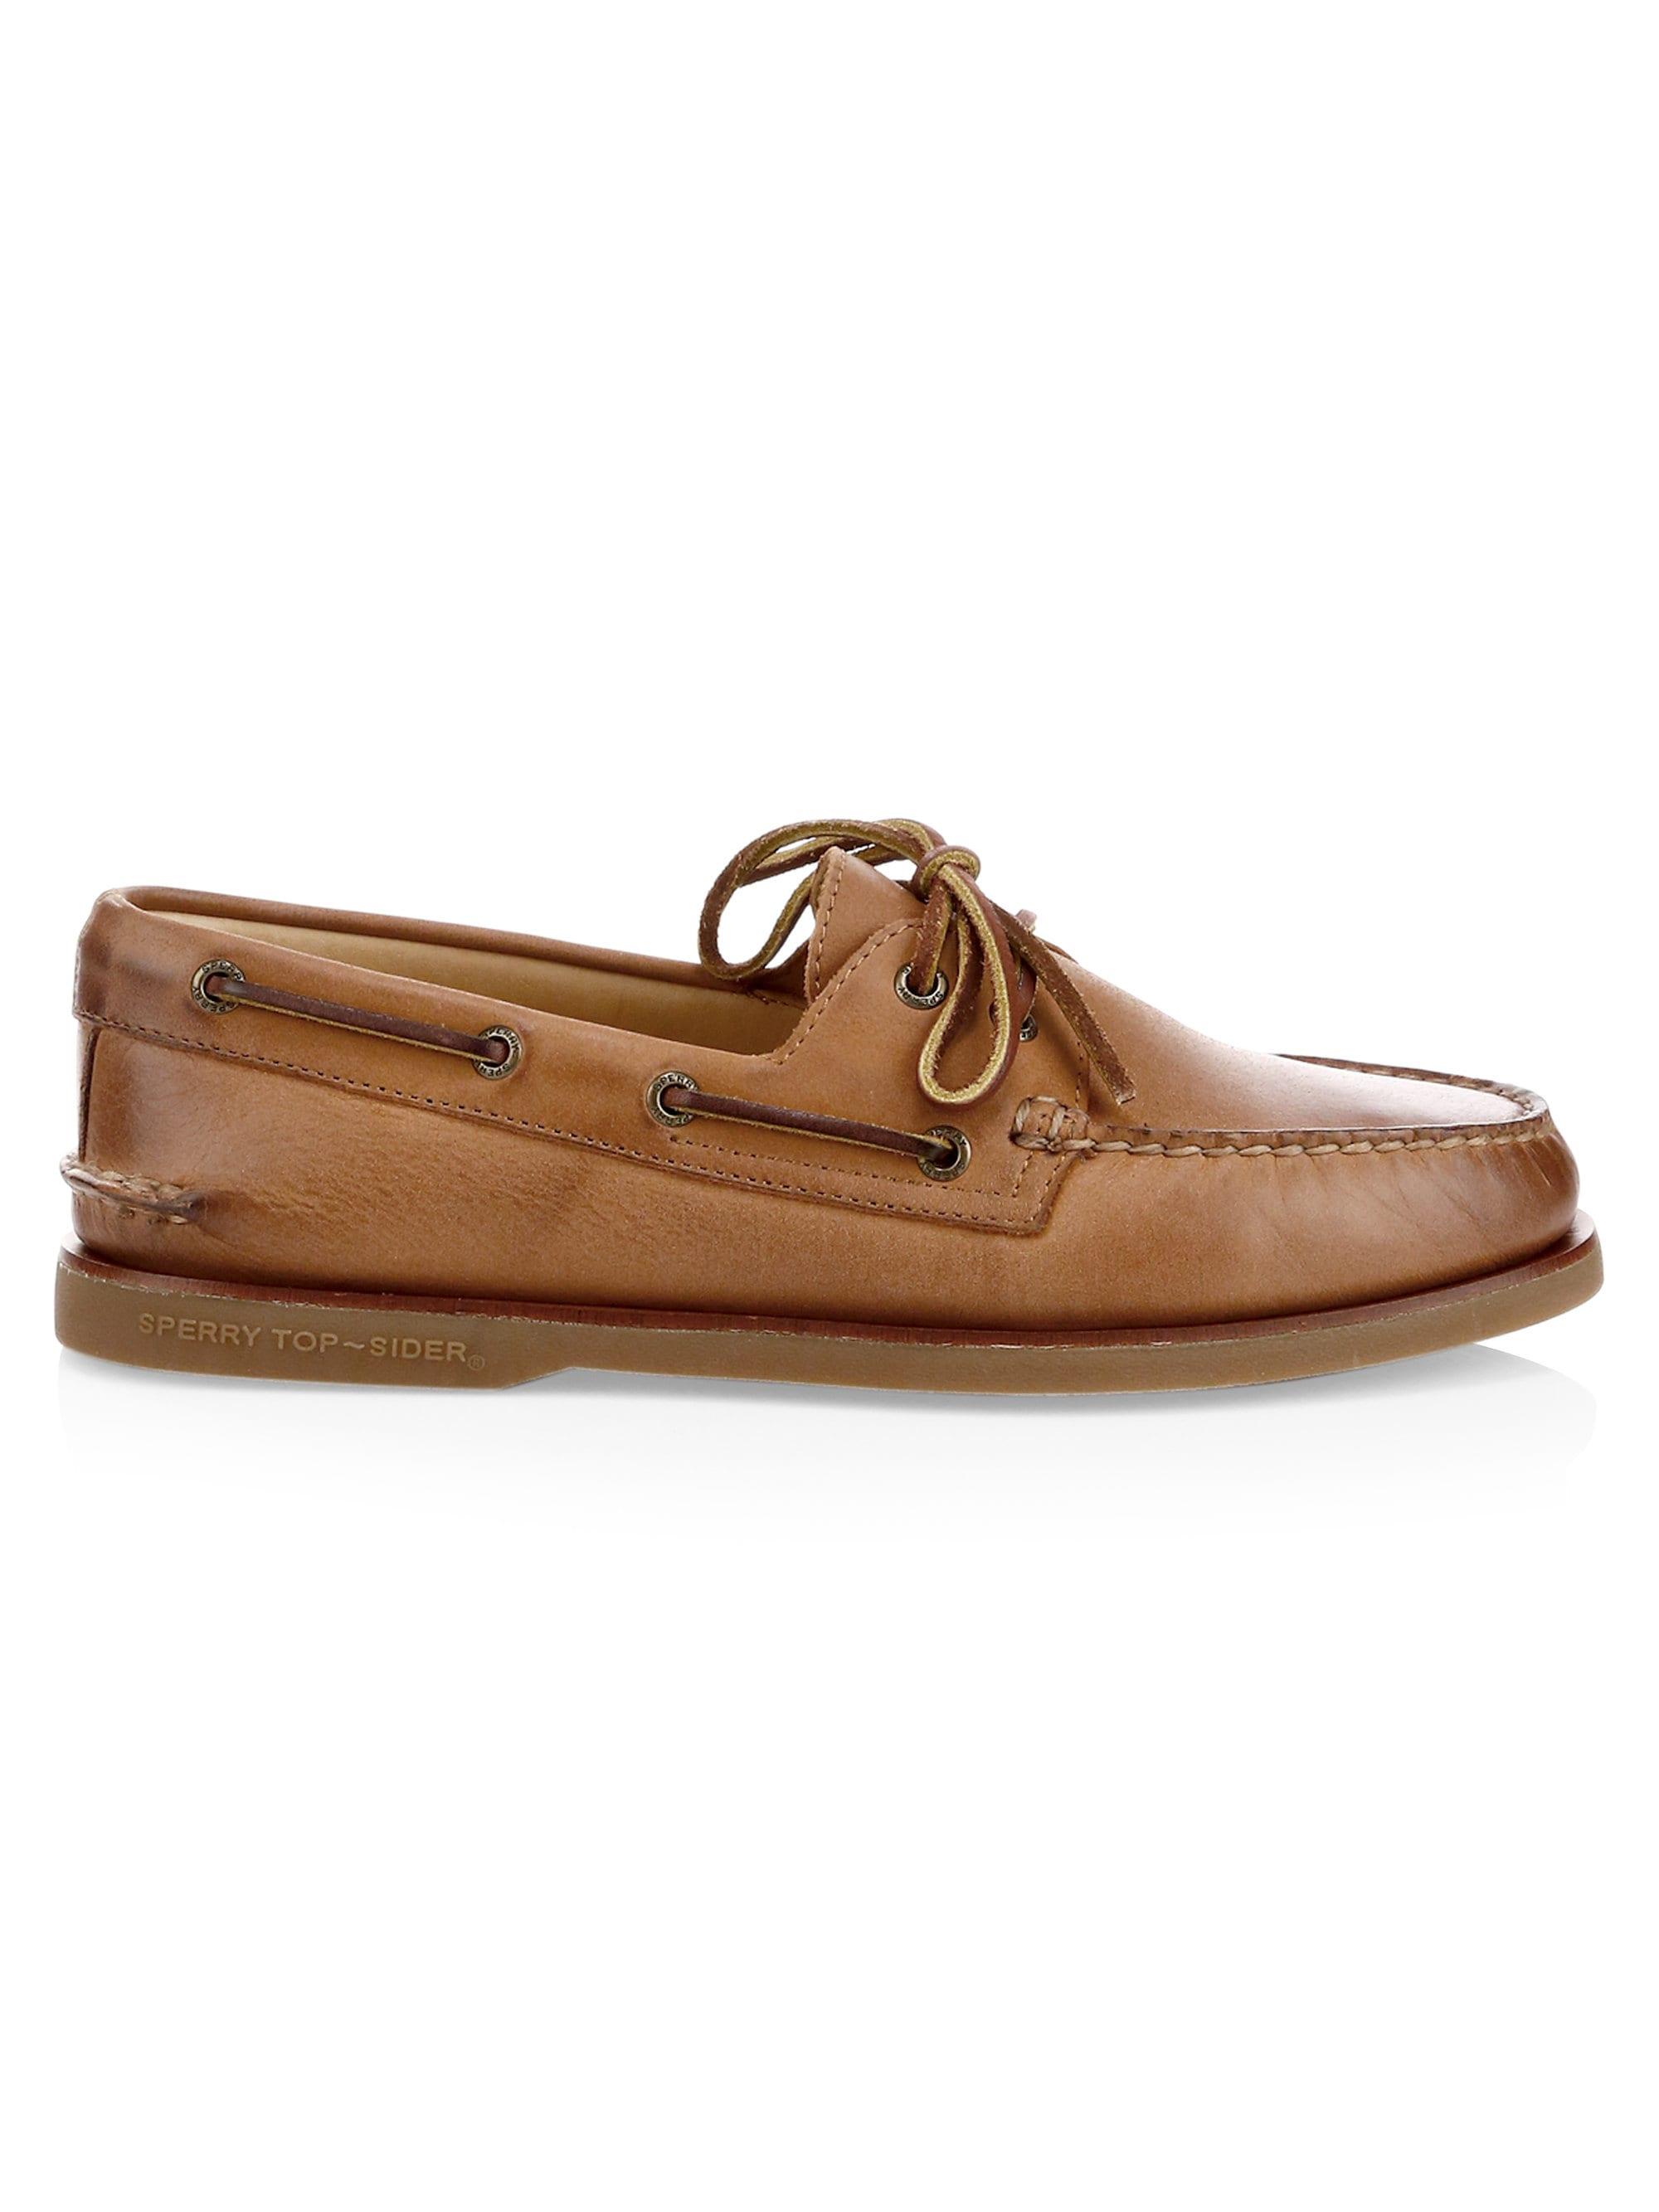 Lyst - Sperry Top-Sider Gold Cup Authentic Original ...